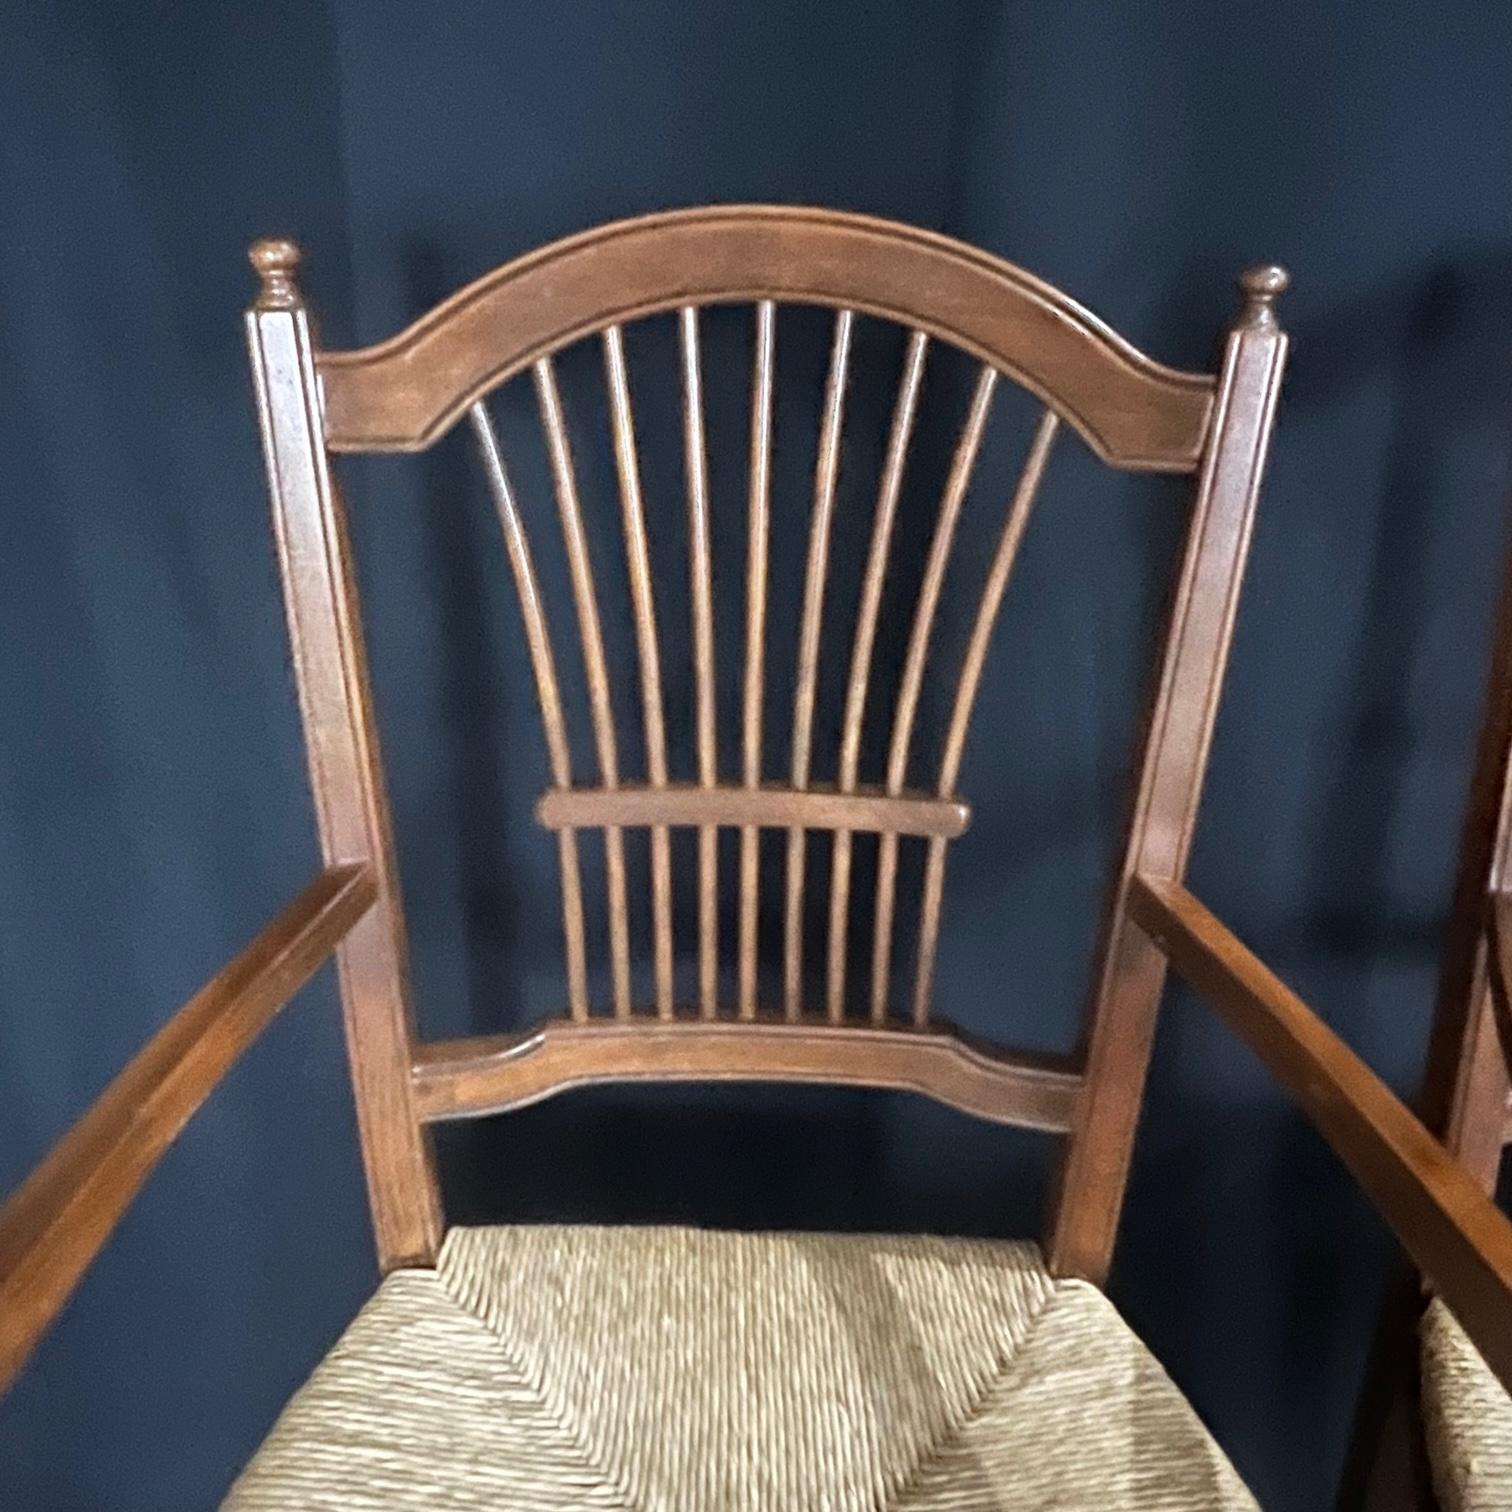 Super high quality set of 4 classic Italian rush seat walnut chairs with intricate splayed spindle backs and H stretchers. Beautiful floral pattern on apron and on tops of turned legs. Sturdy and comfortable. Seat height 18.5
#3525.